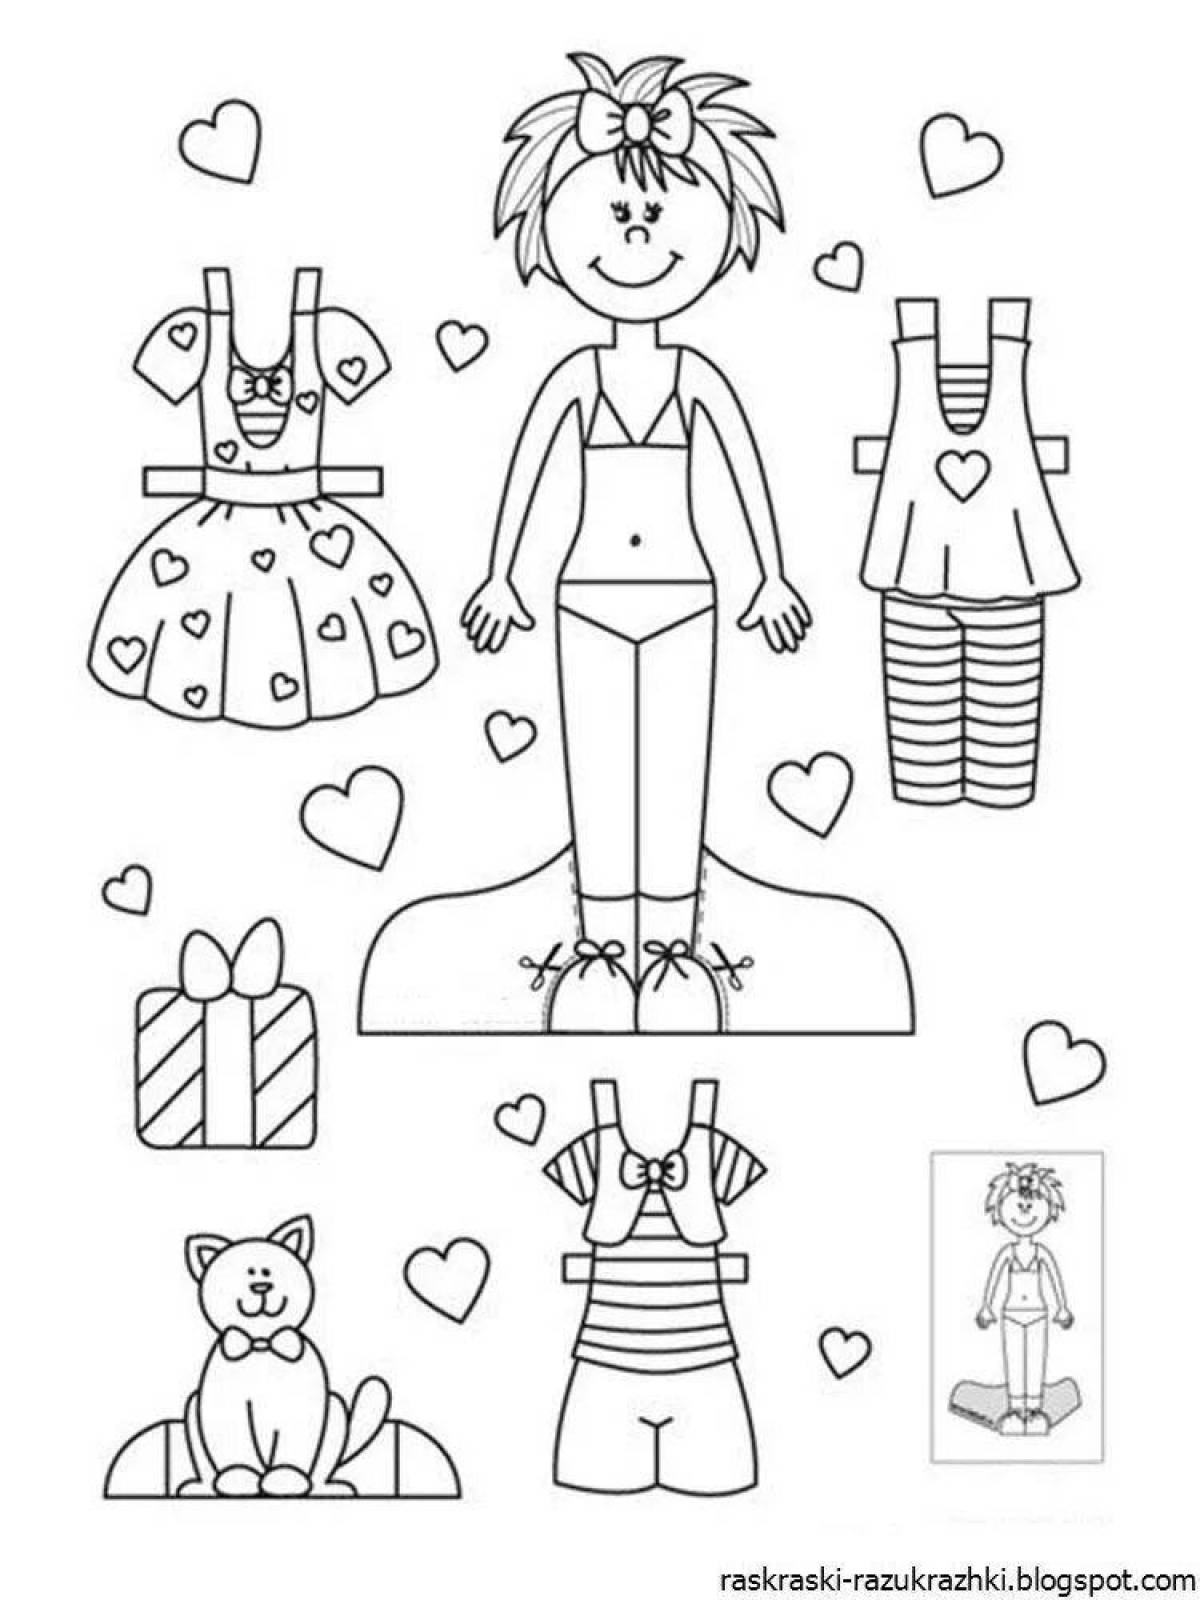 Gorgeous cutters coloring page